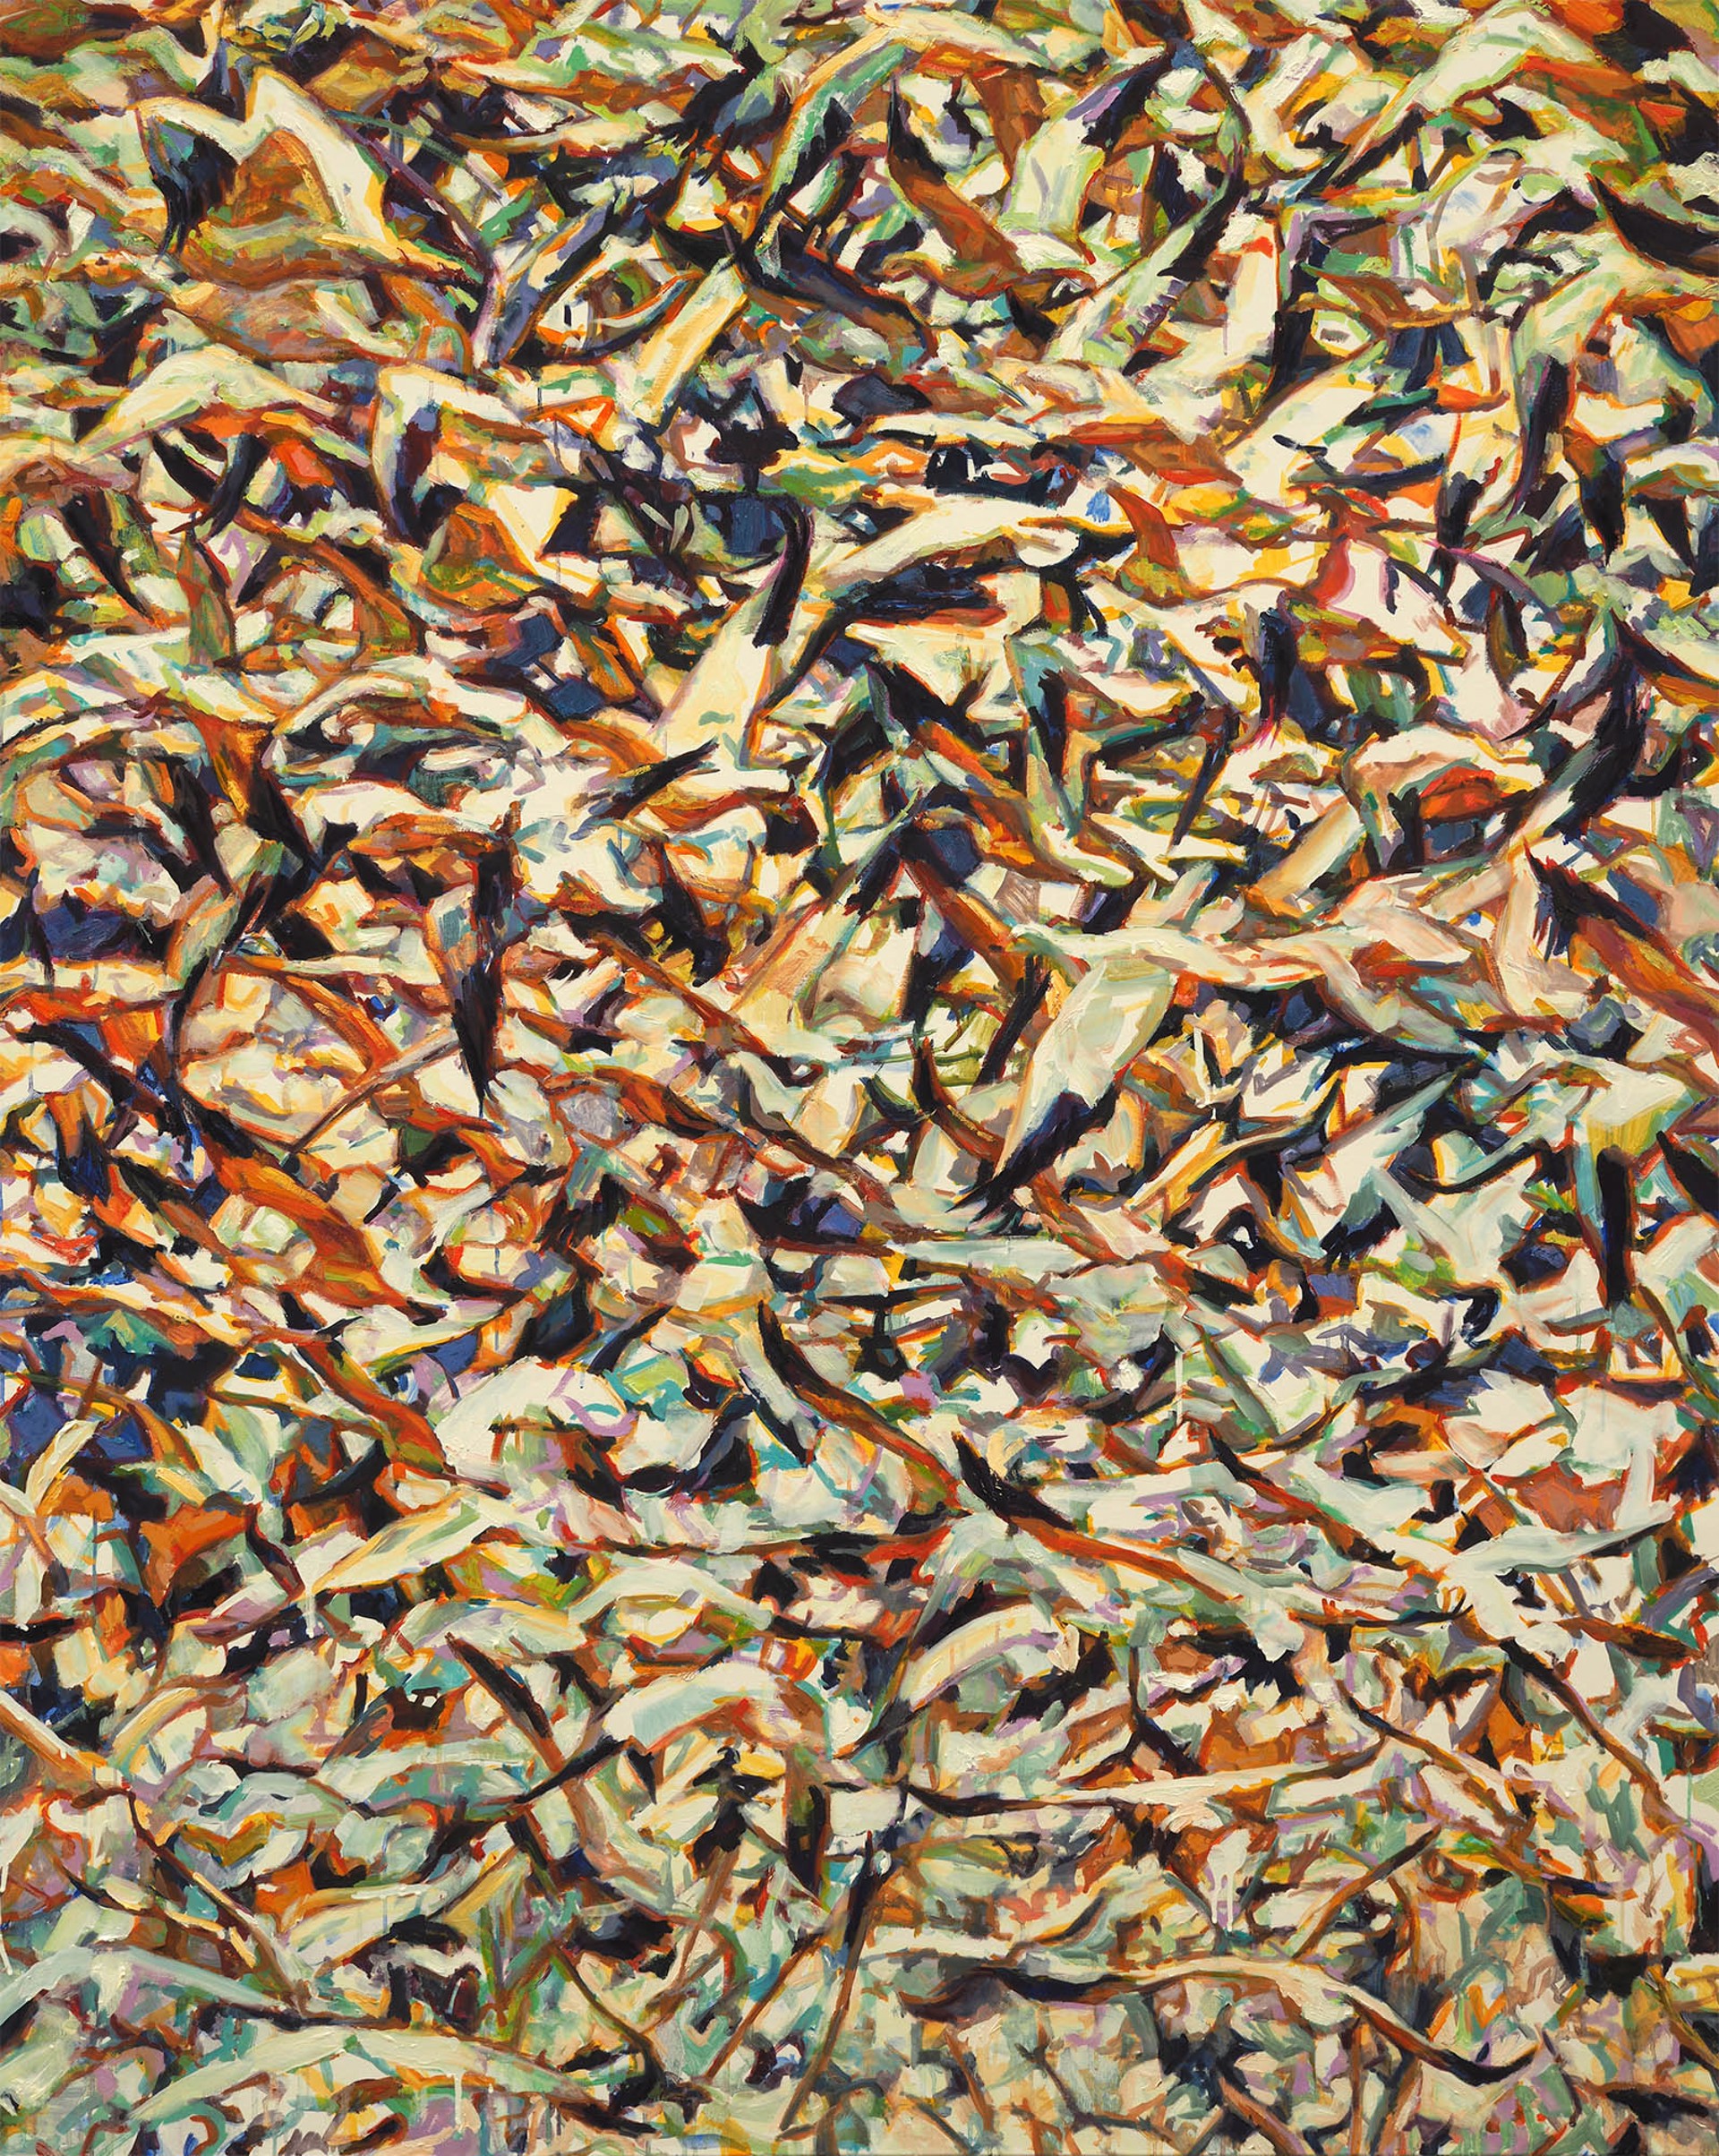 Abstract painting of Snow geese migrating by Patricia Griffin